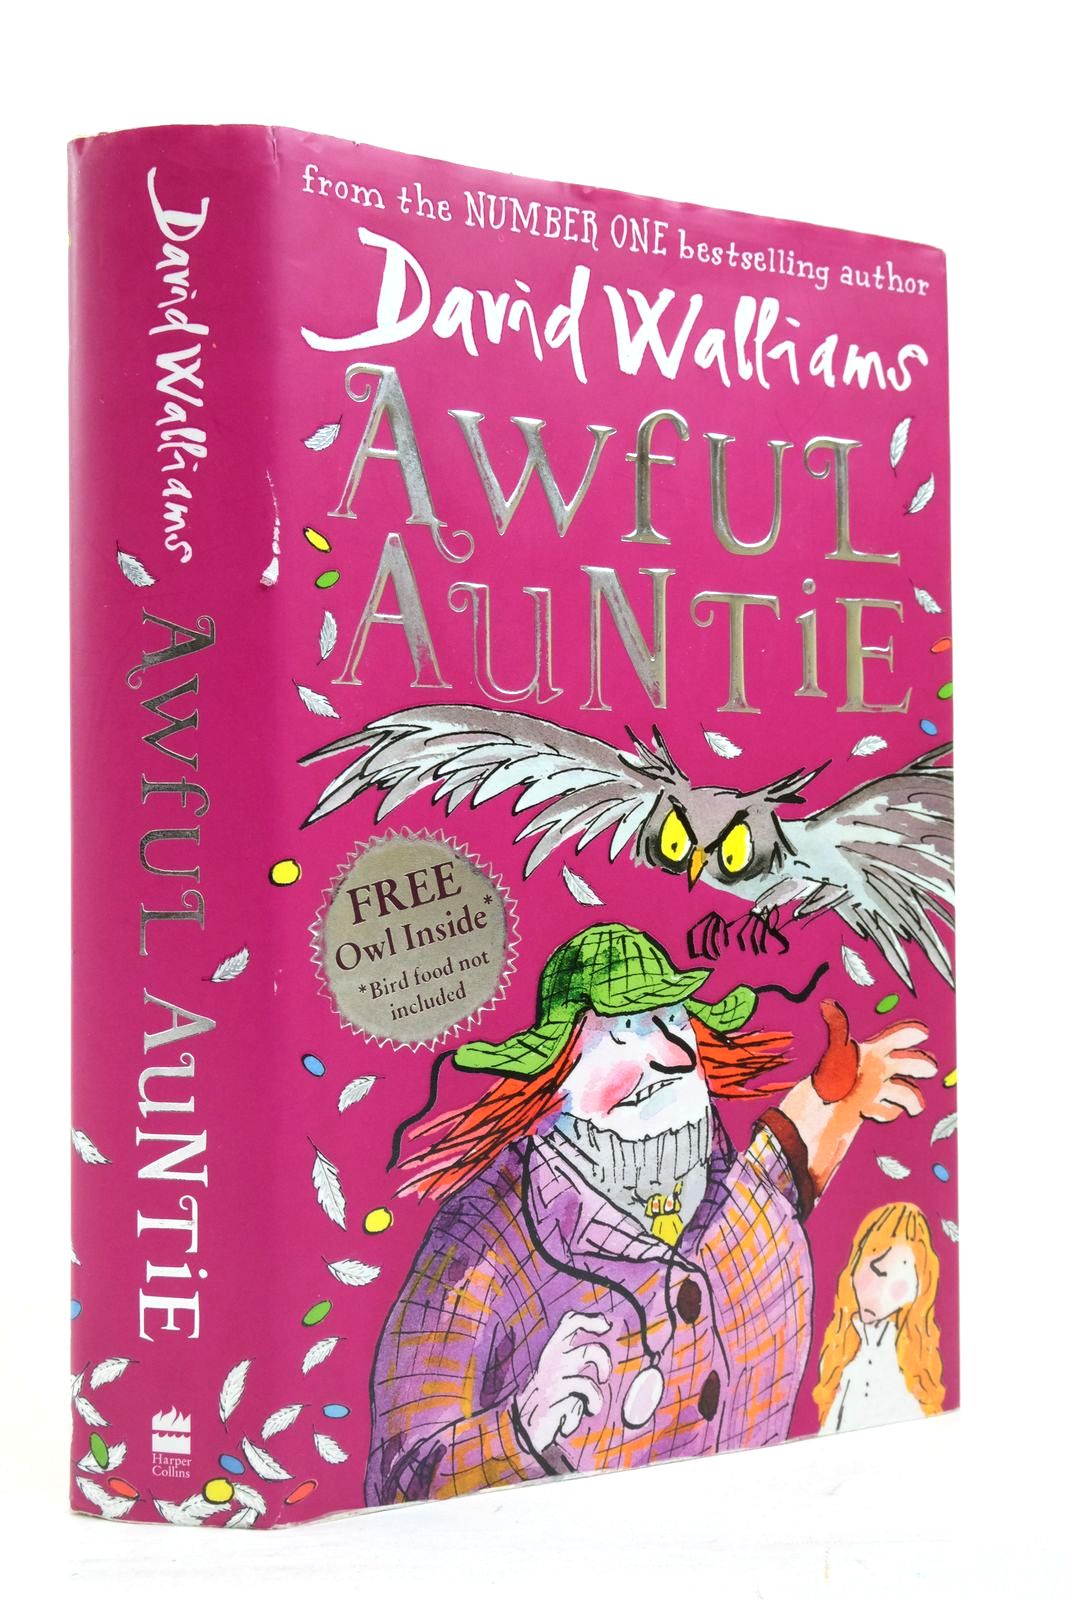 Photo of AWFUL AUNTIE written by Walliams, David illustrated by Ross, Tony published by Harper Collins Childrens Books (STOCK CODE: 2137934)  for sale by Stella & Rose's Books